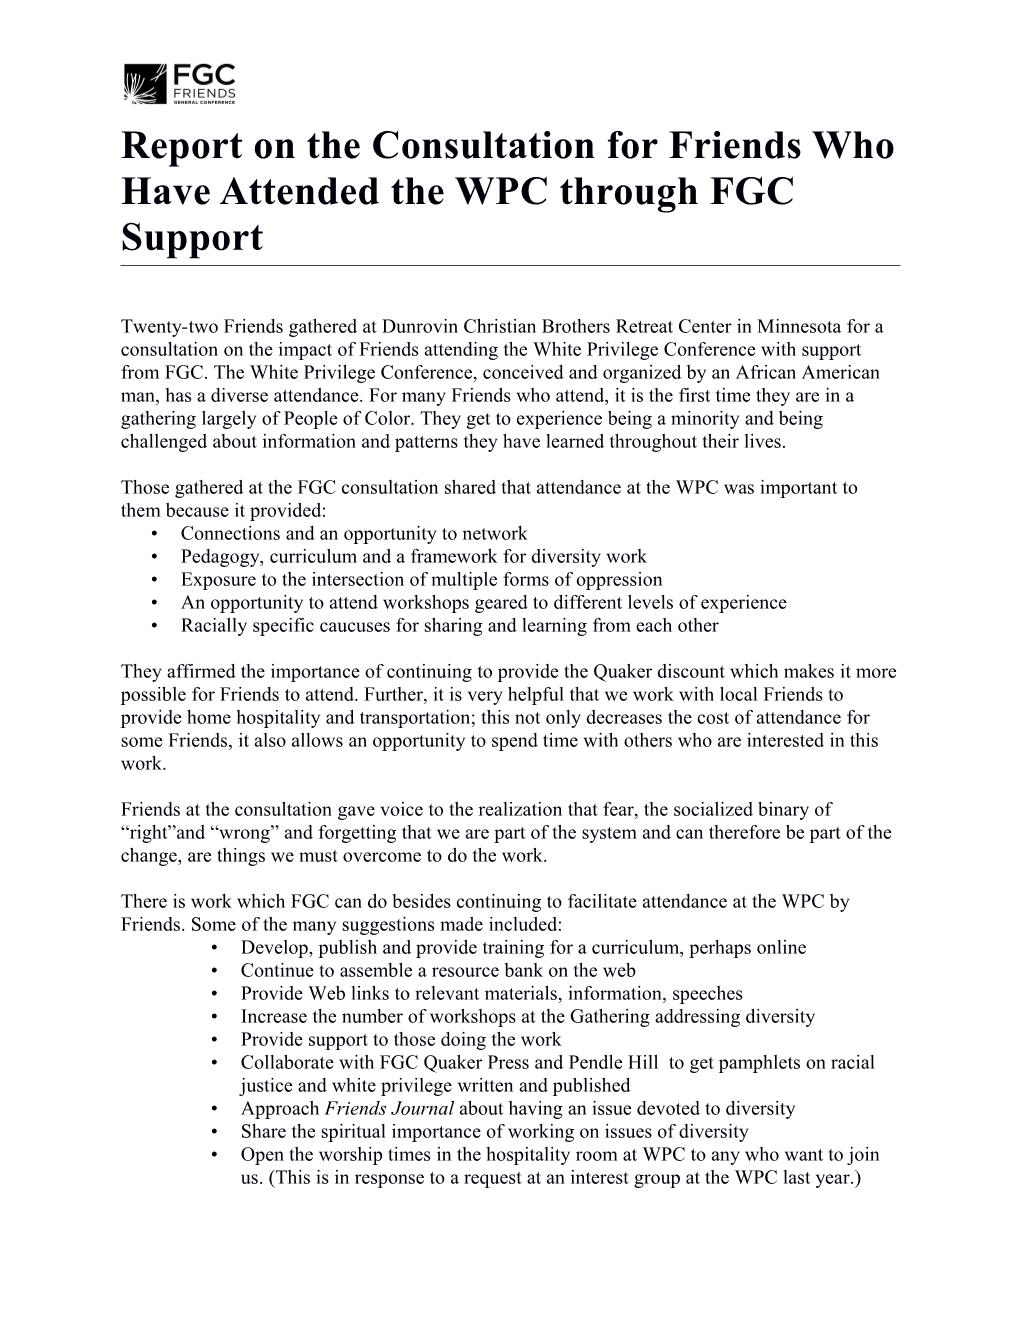 Report on the Consultation for Friends Who Have Attended the WPC Through FGC Support